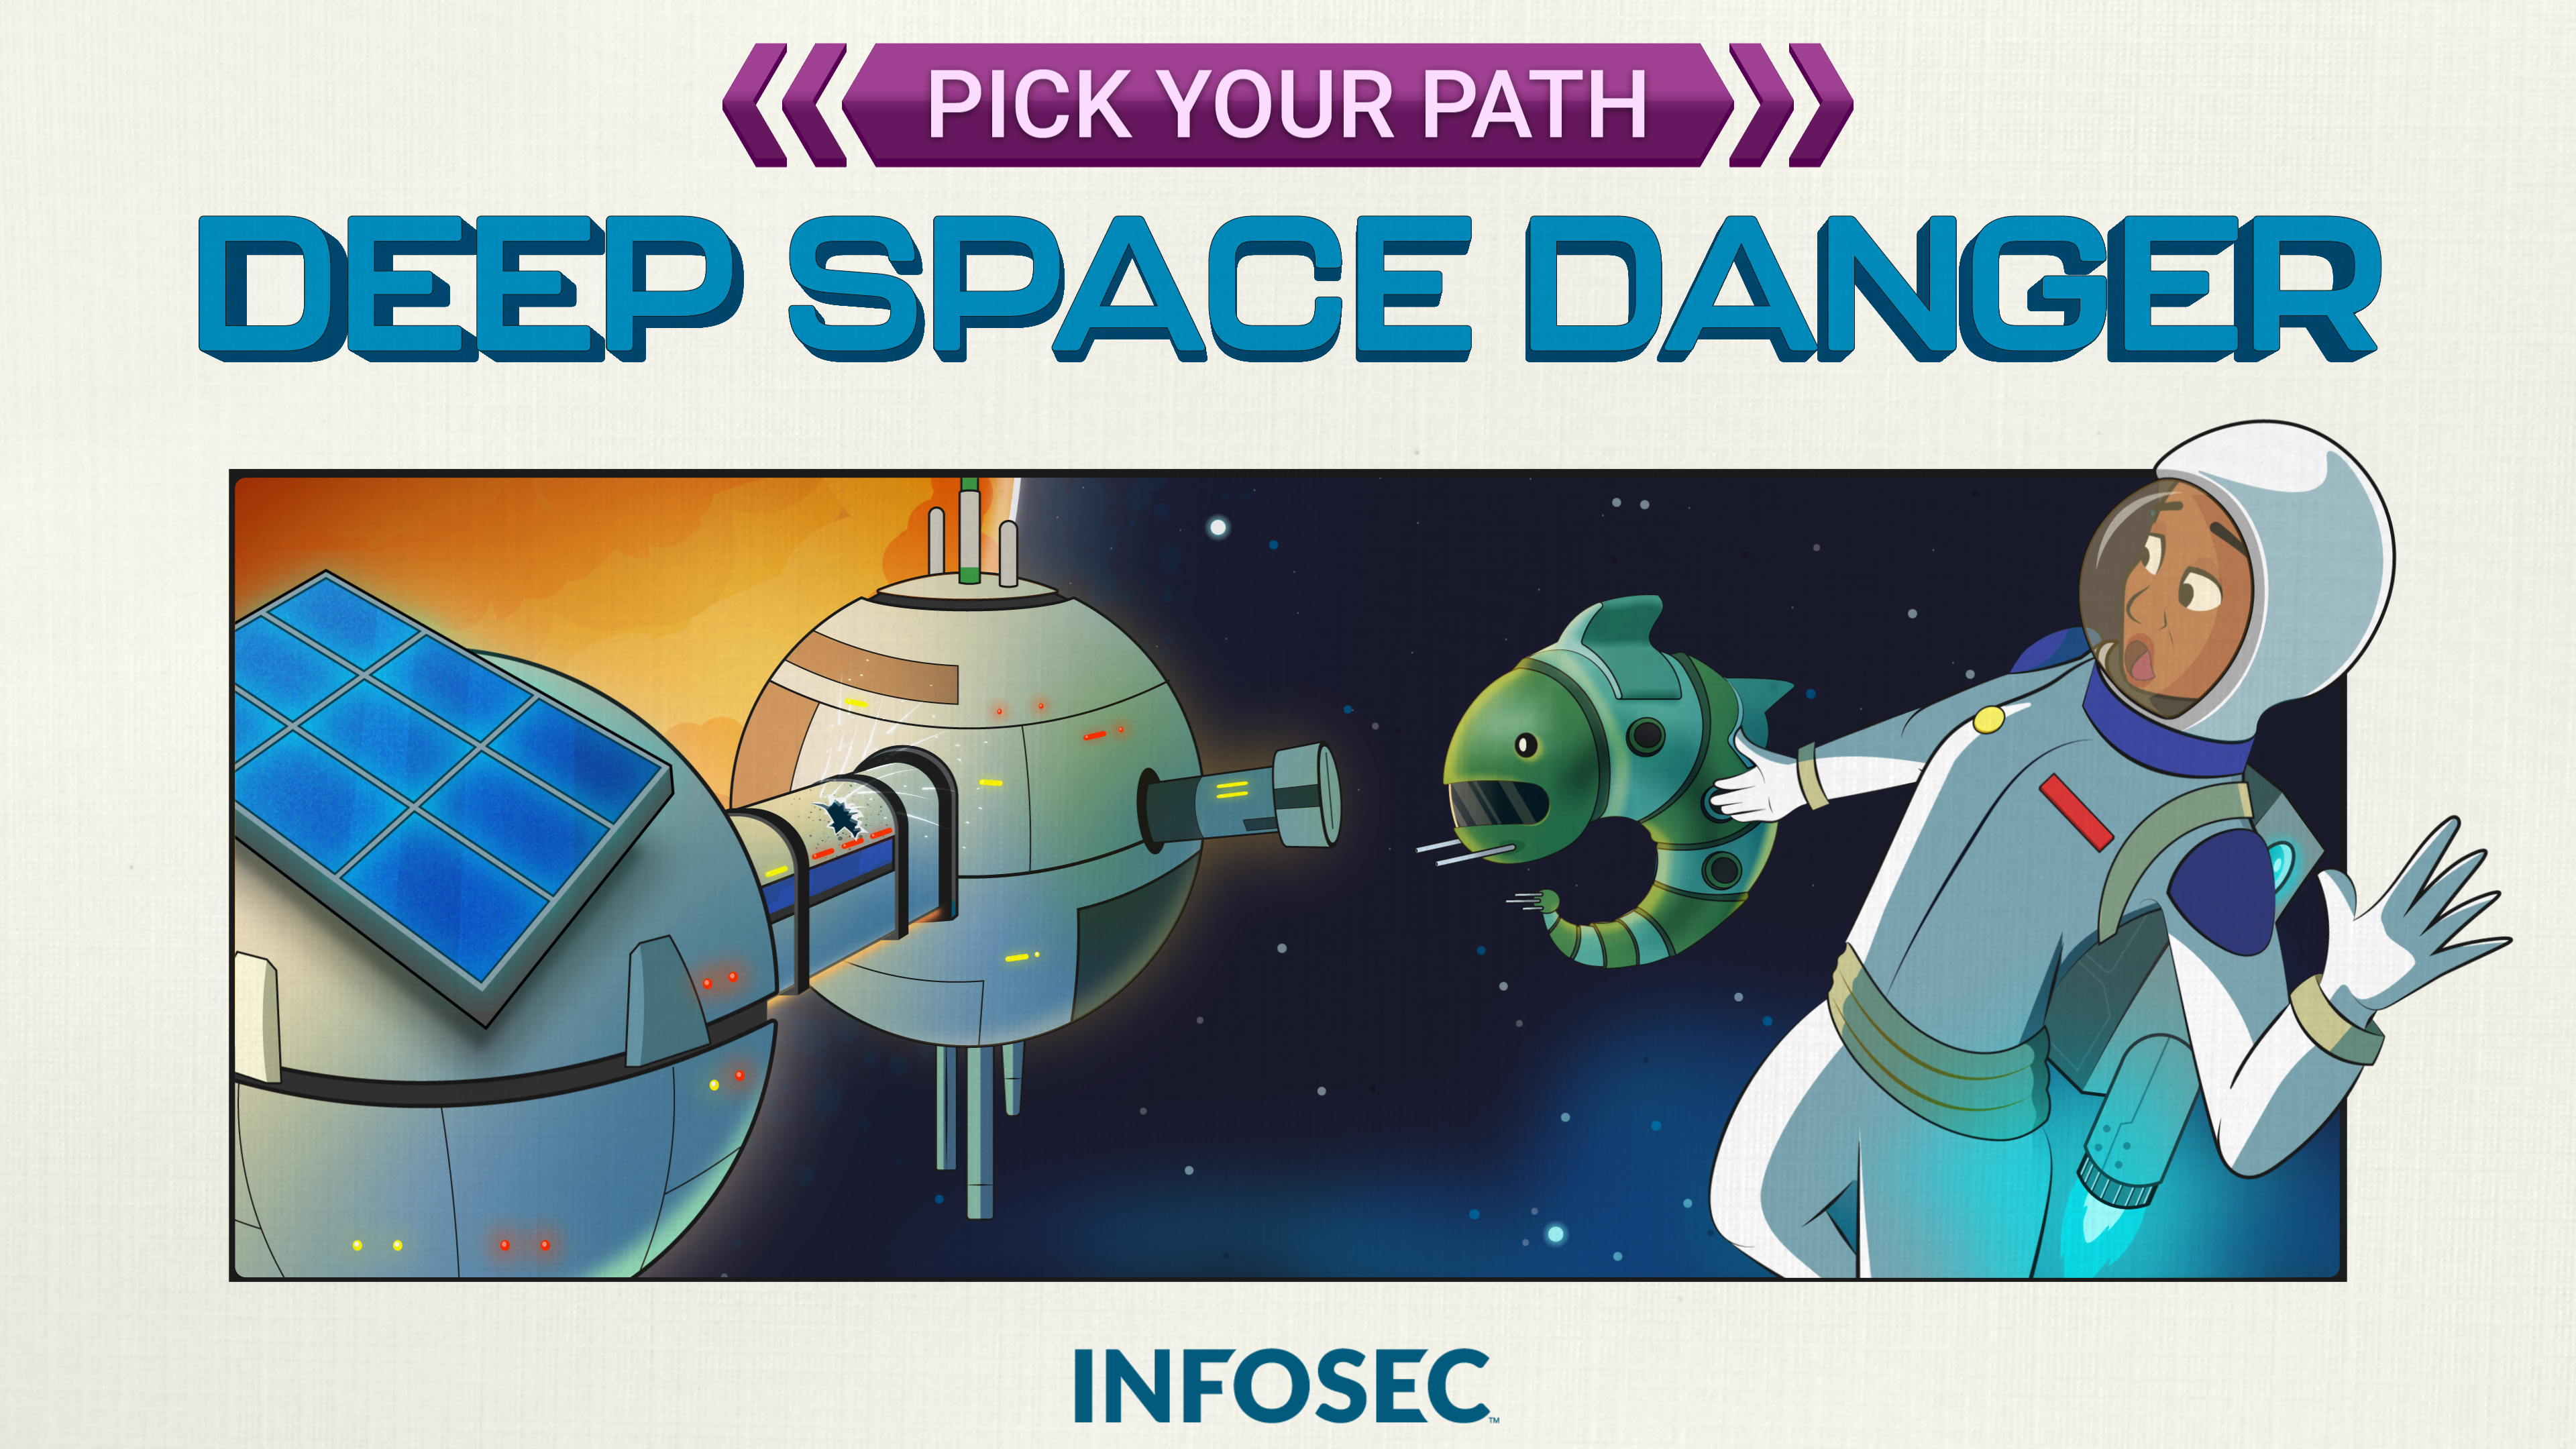 Pick Your Path: Deep Space Danger